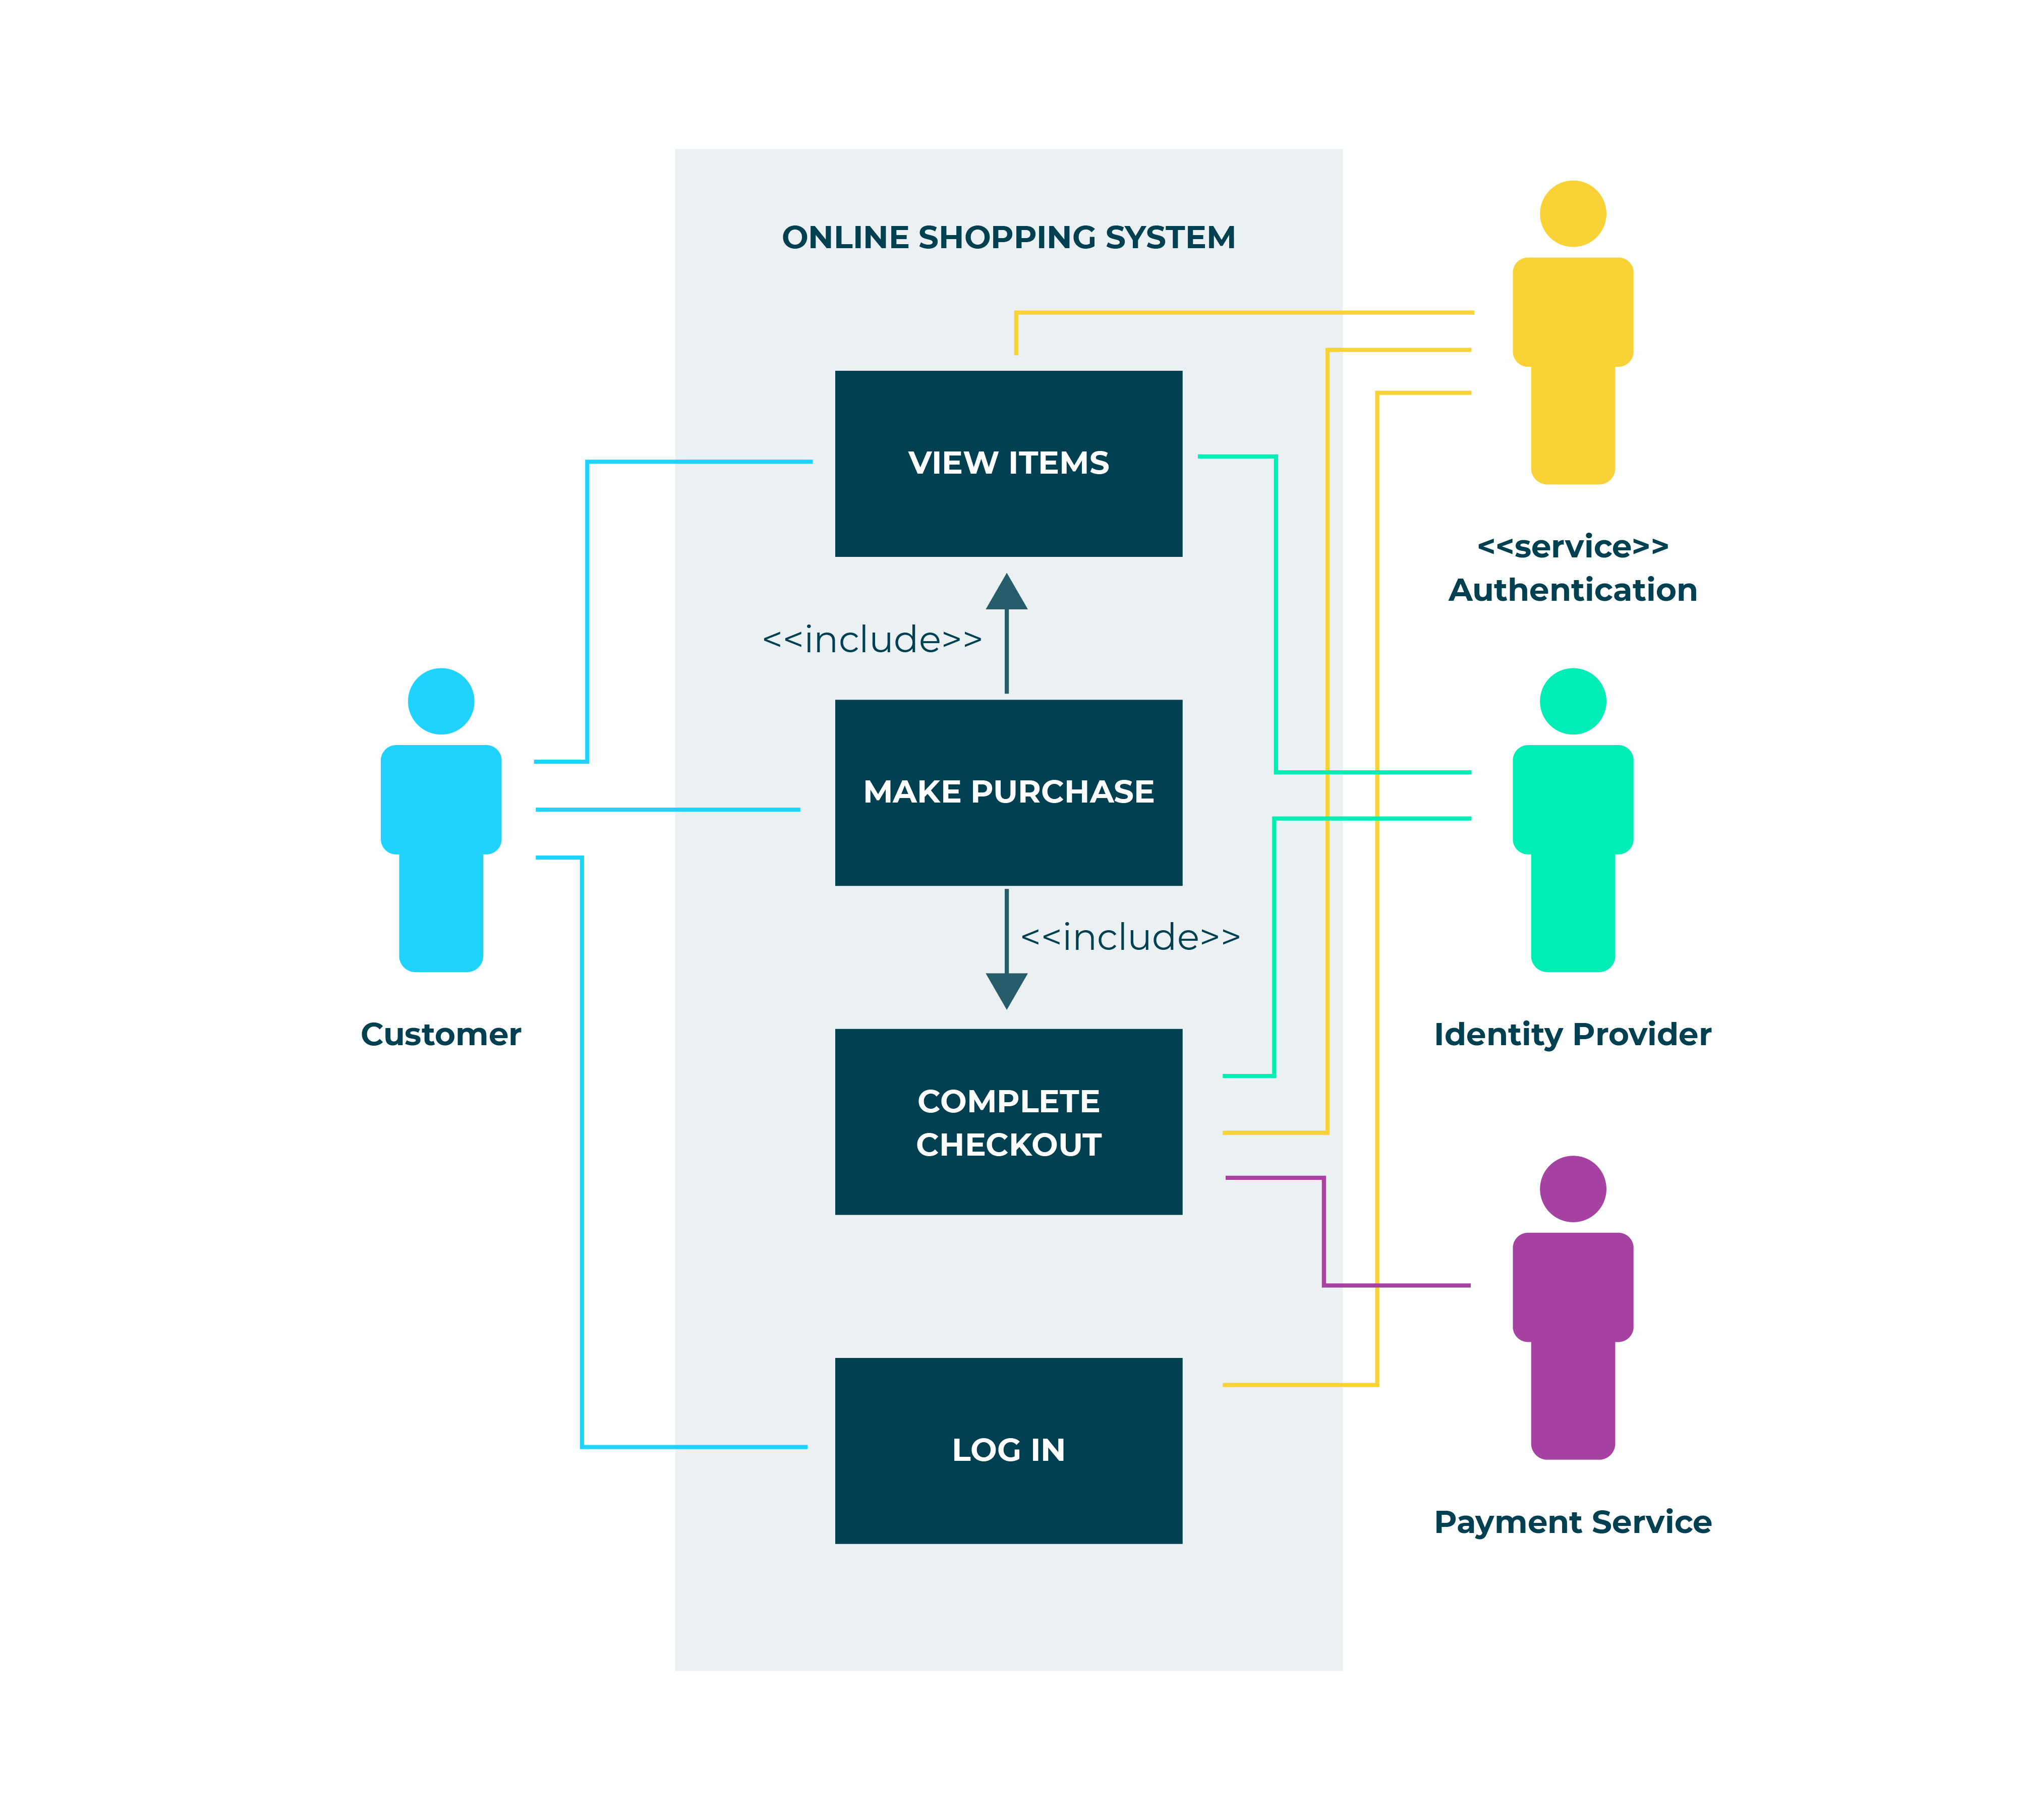 Diagram: A use case diagram for an online shopping system. The diagram involves, the customer, service authentication, identity provider and payment service. The actions are view items, make purchase, complete checkout, and log in,